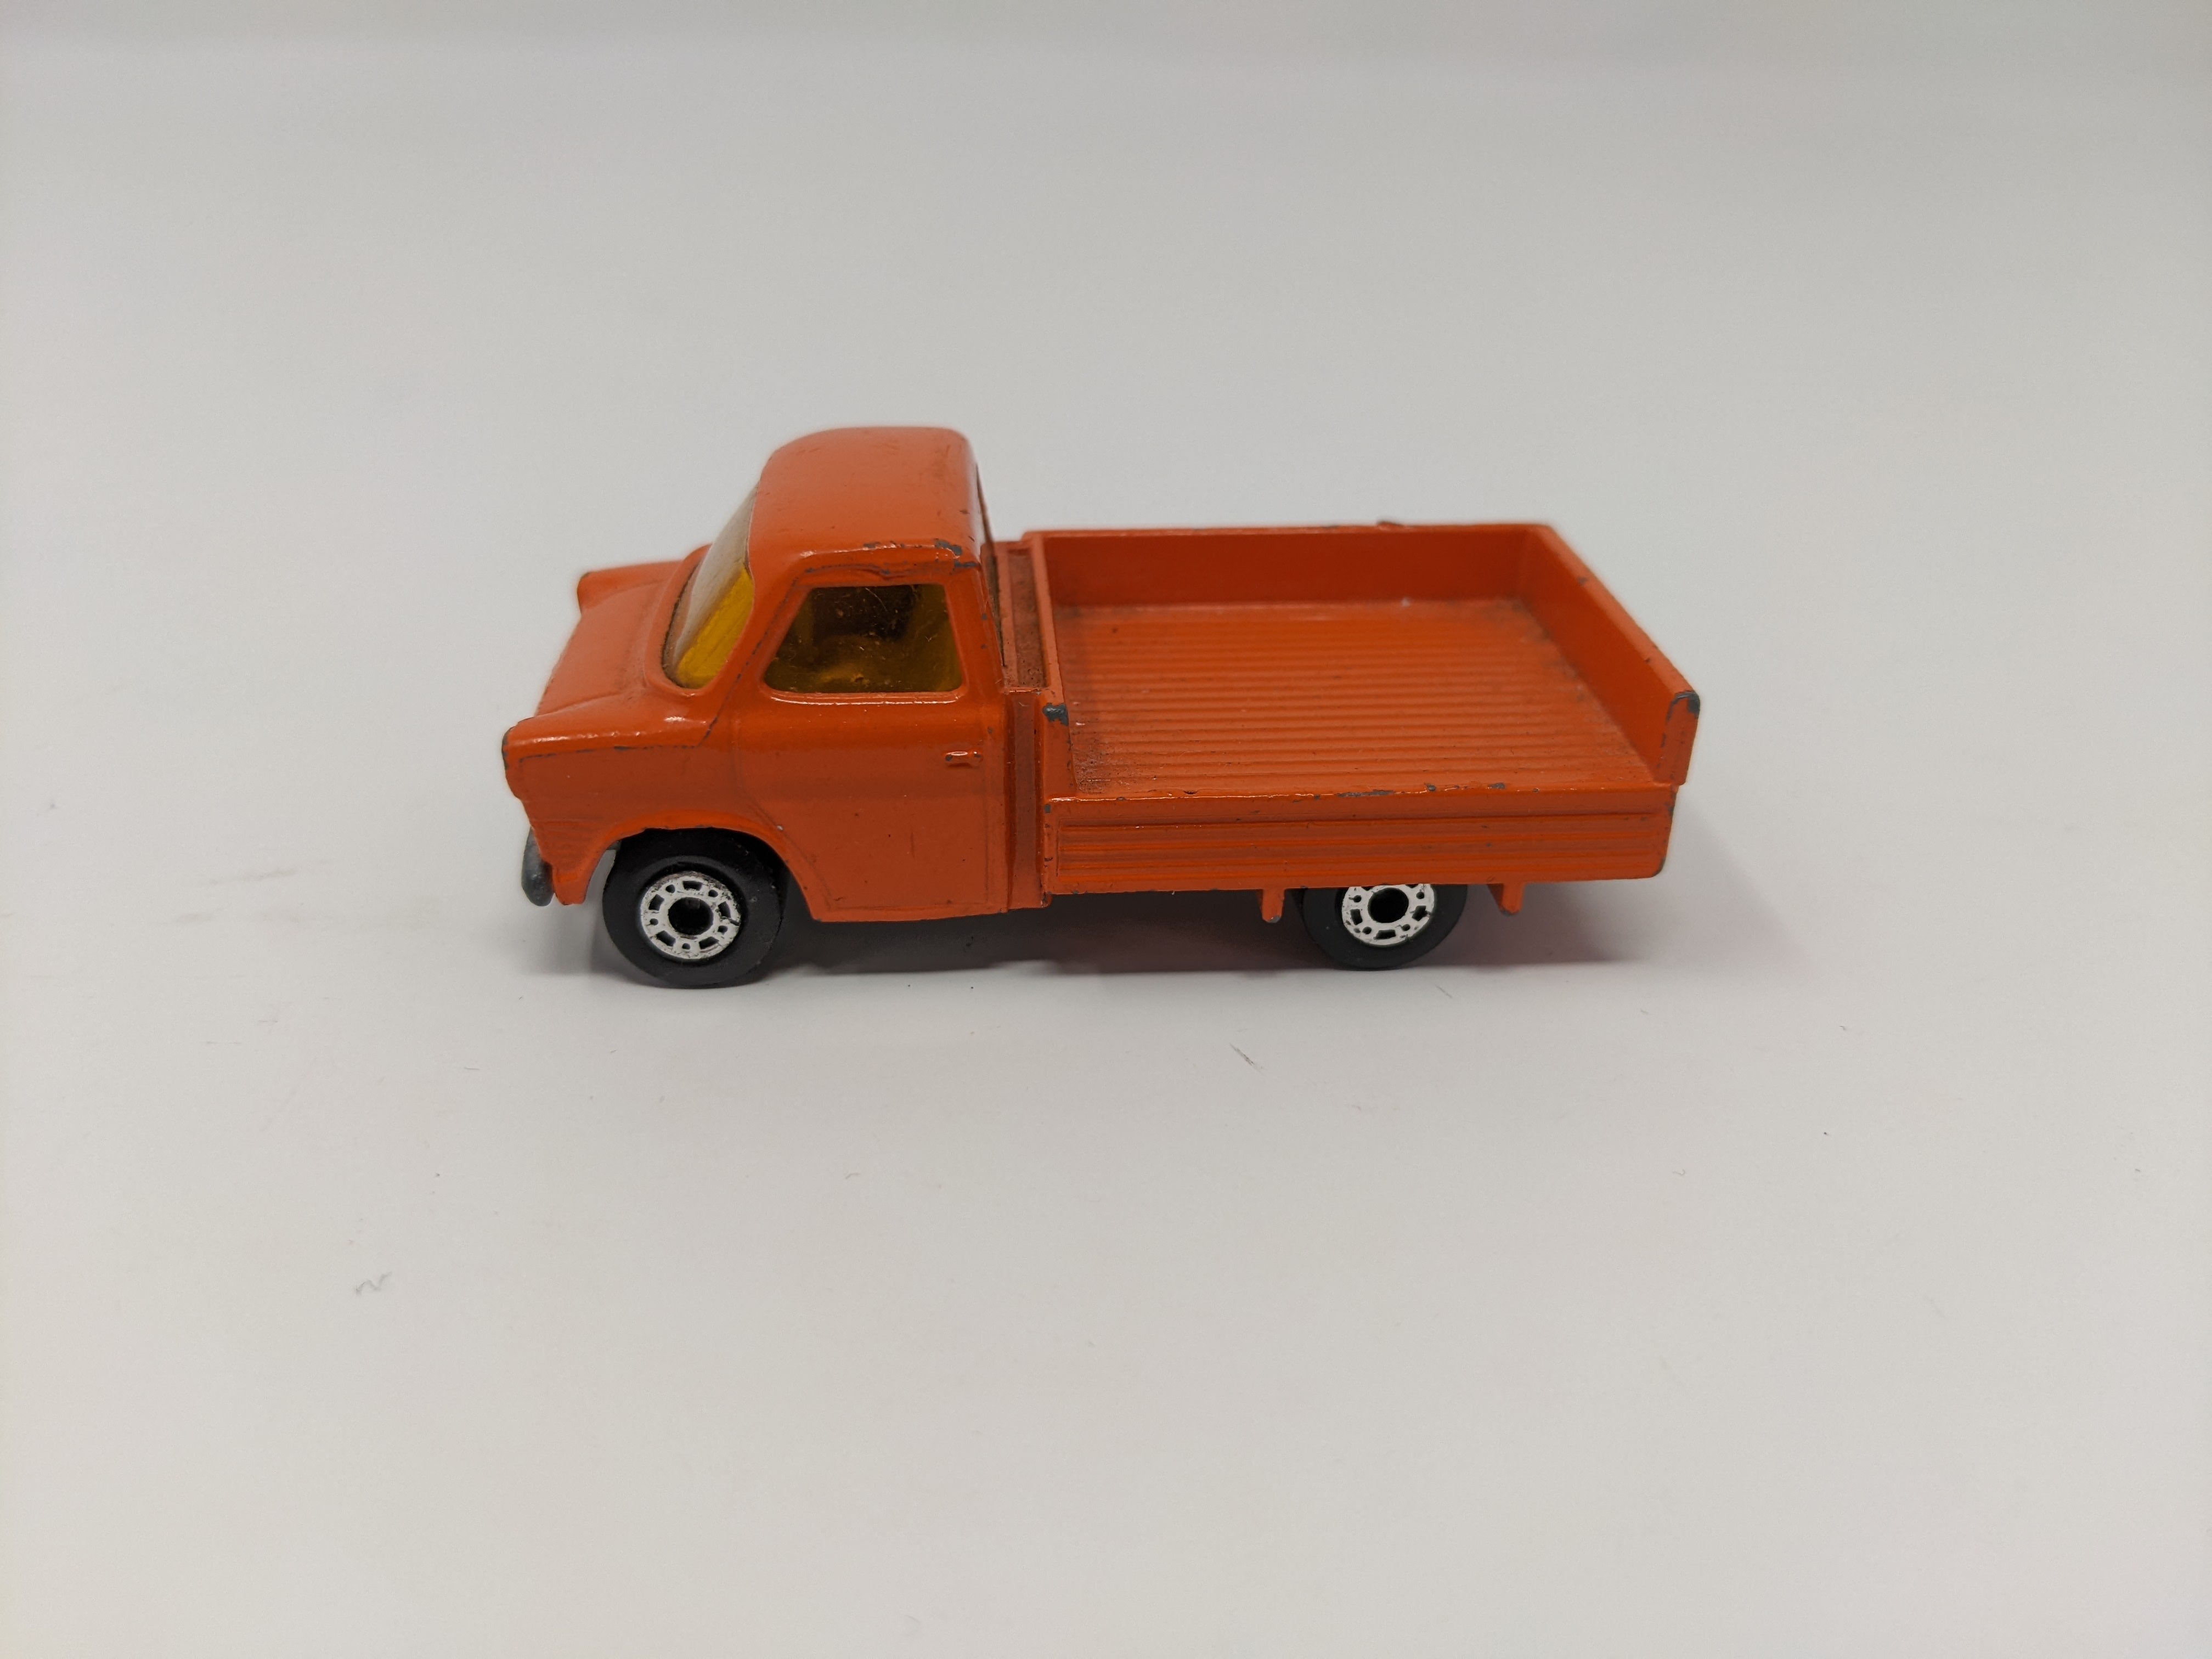 USED Matchbox , Ford Transit Superfast No. 66 Truck, 1977 Lesney, Made in England